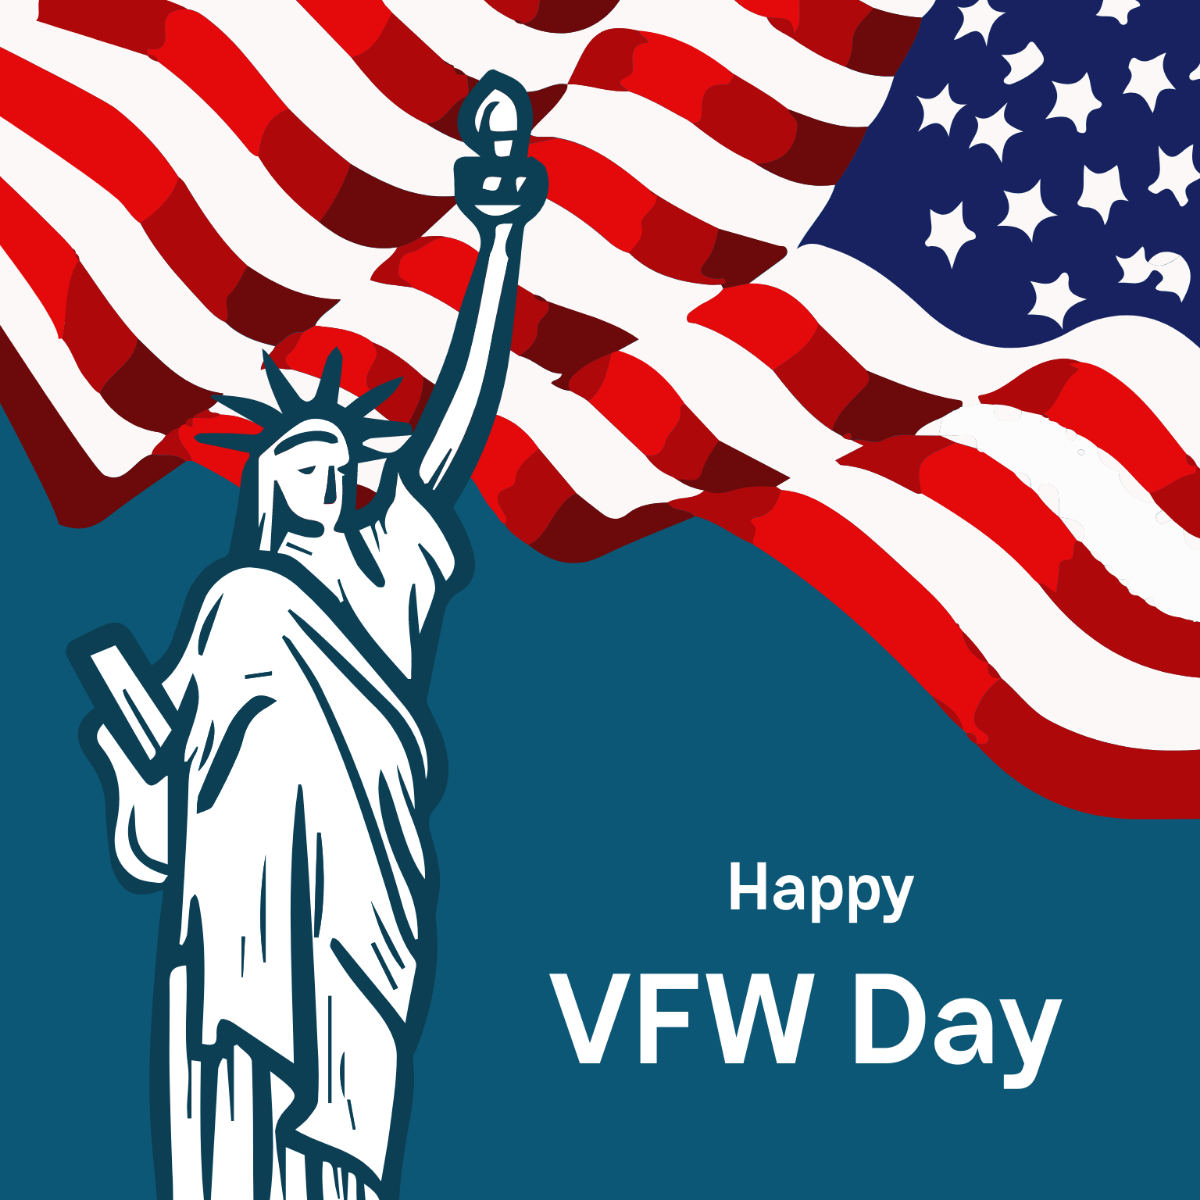 Free Happy VFW Day Vector Template